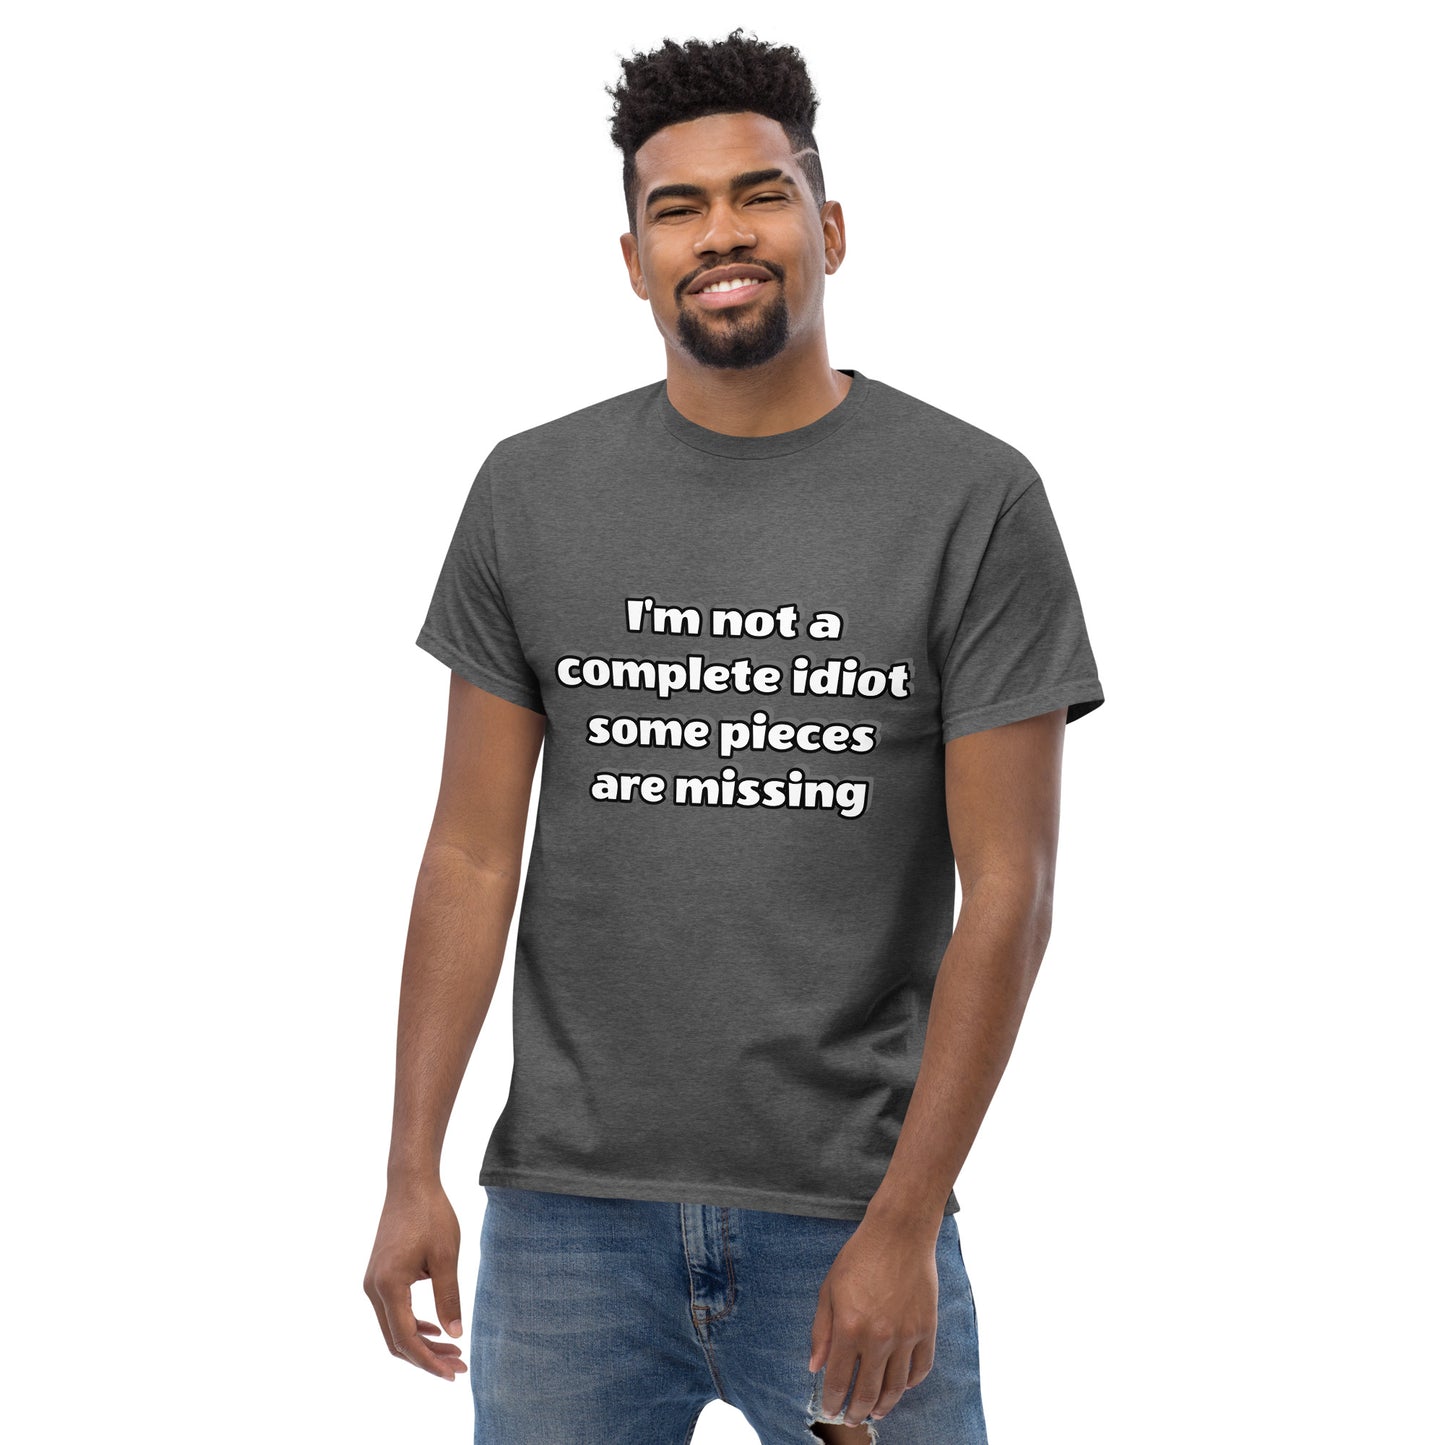 Men with gray t-shirt with text “I’m not a complete idiot, some pieces are missing”